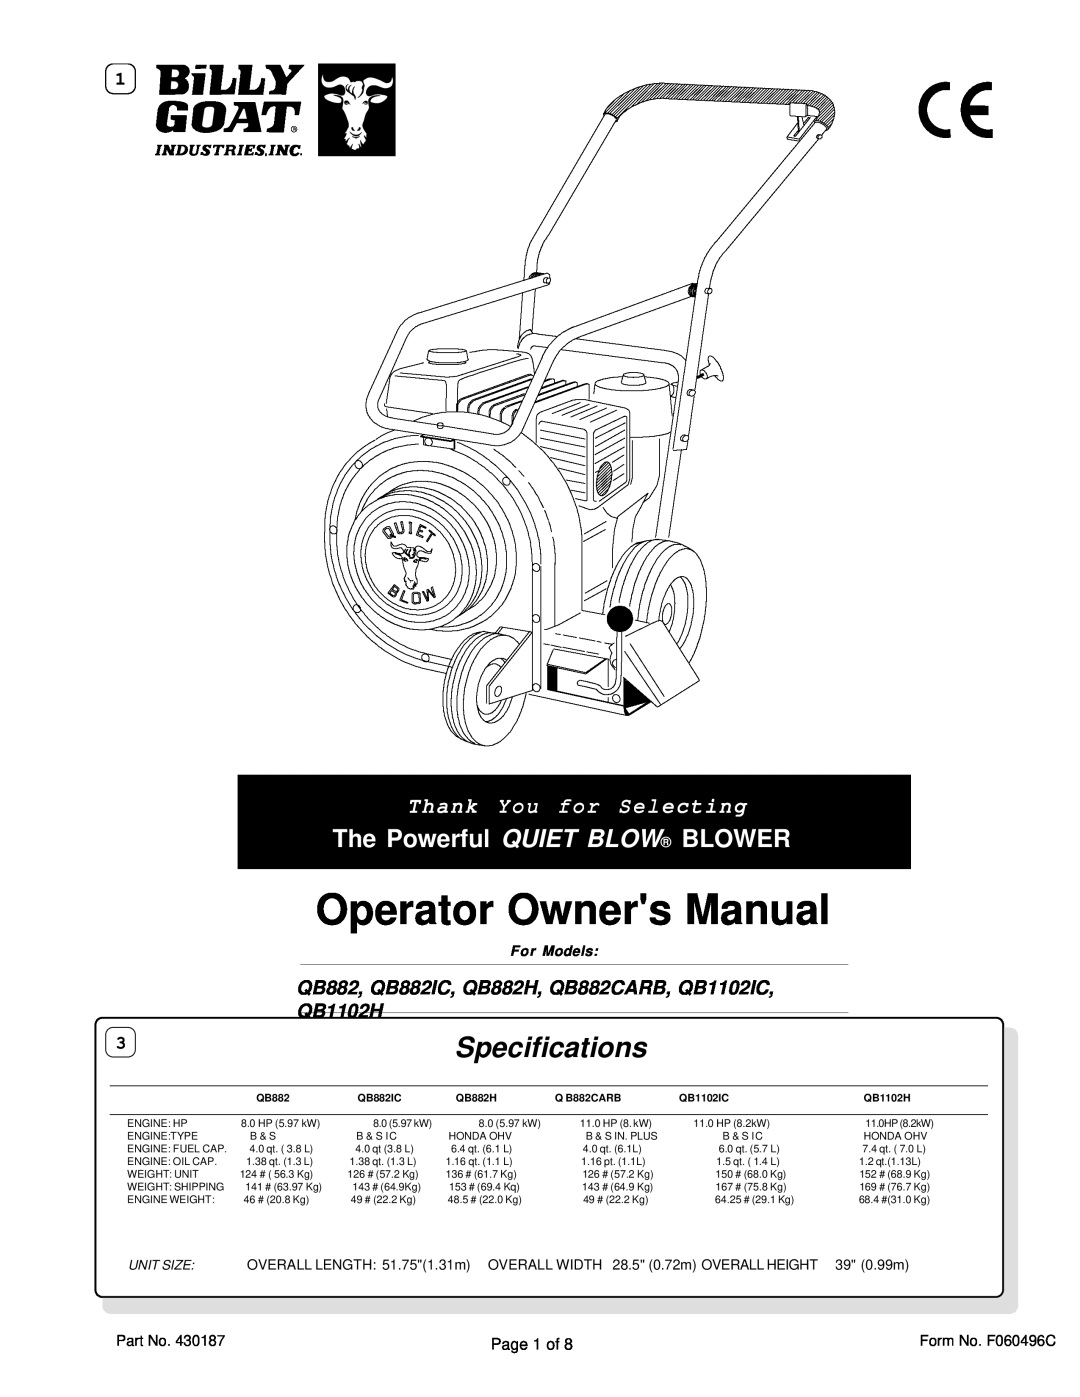 Billy Goat QB882 specifications Specifications, The Powerful QUIET BLOW BLOWER, Thank You for Selecting, For Models 